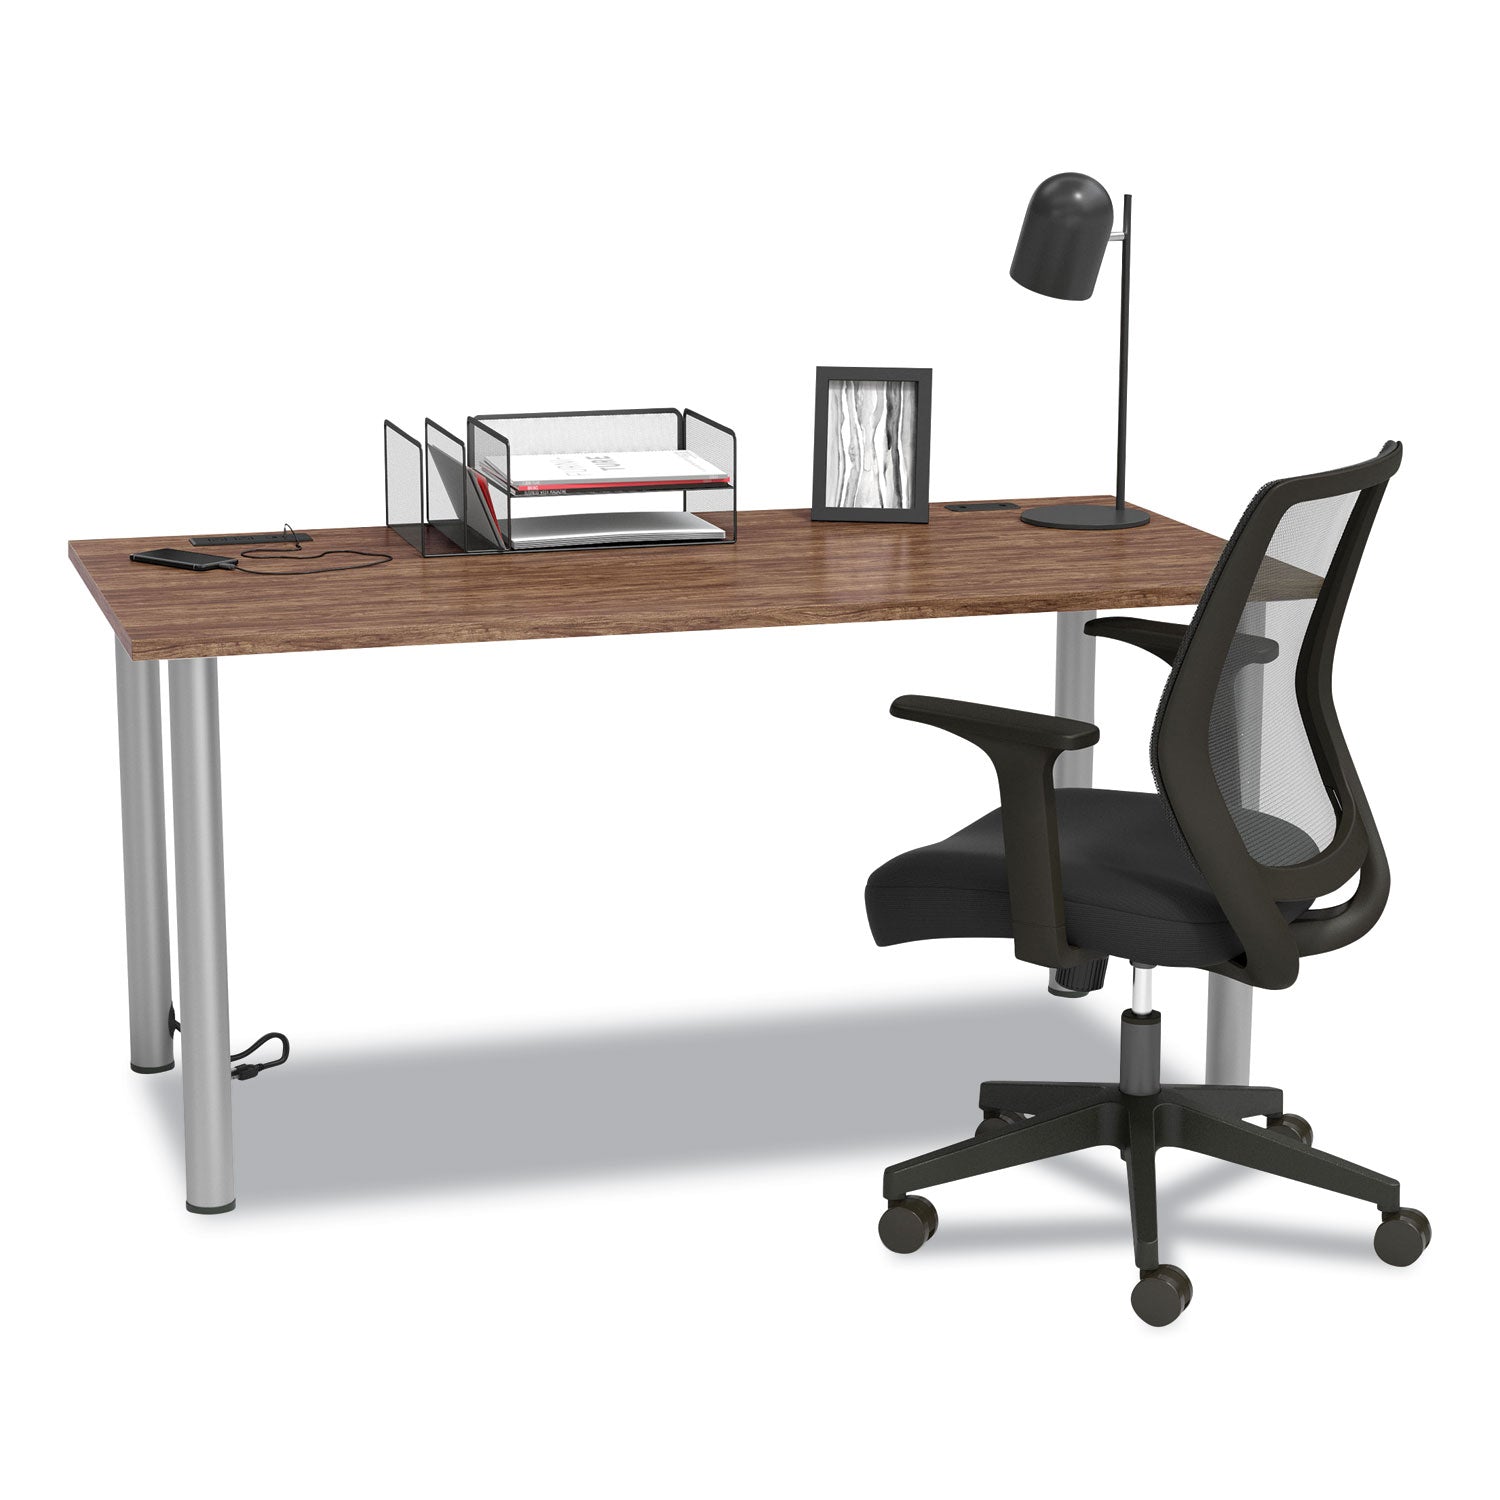 essentials-writing-table-desk-with-integrated-power-management-597-x-293-x-288-espresso-aluminum_uos24398967 - 6